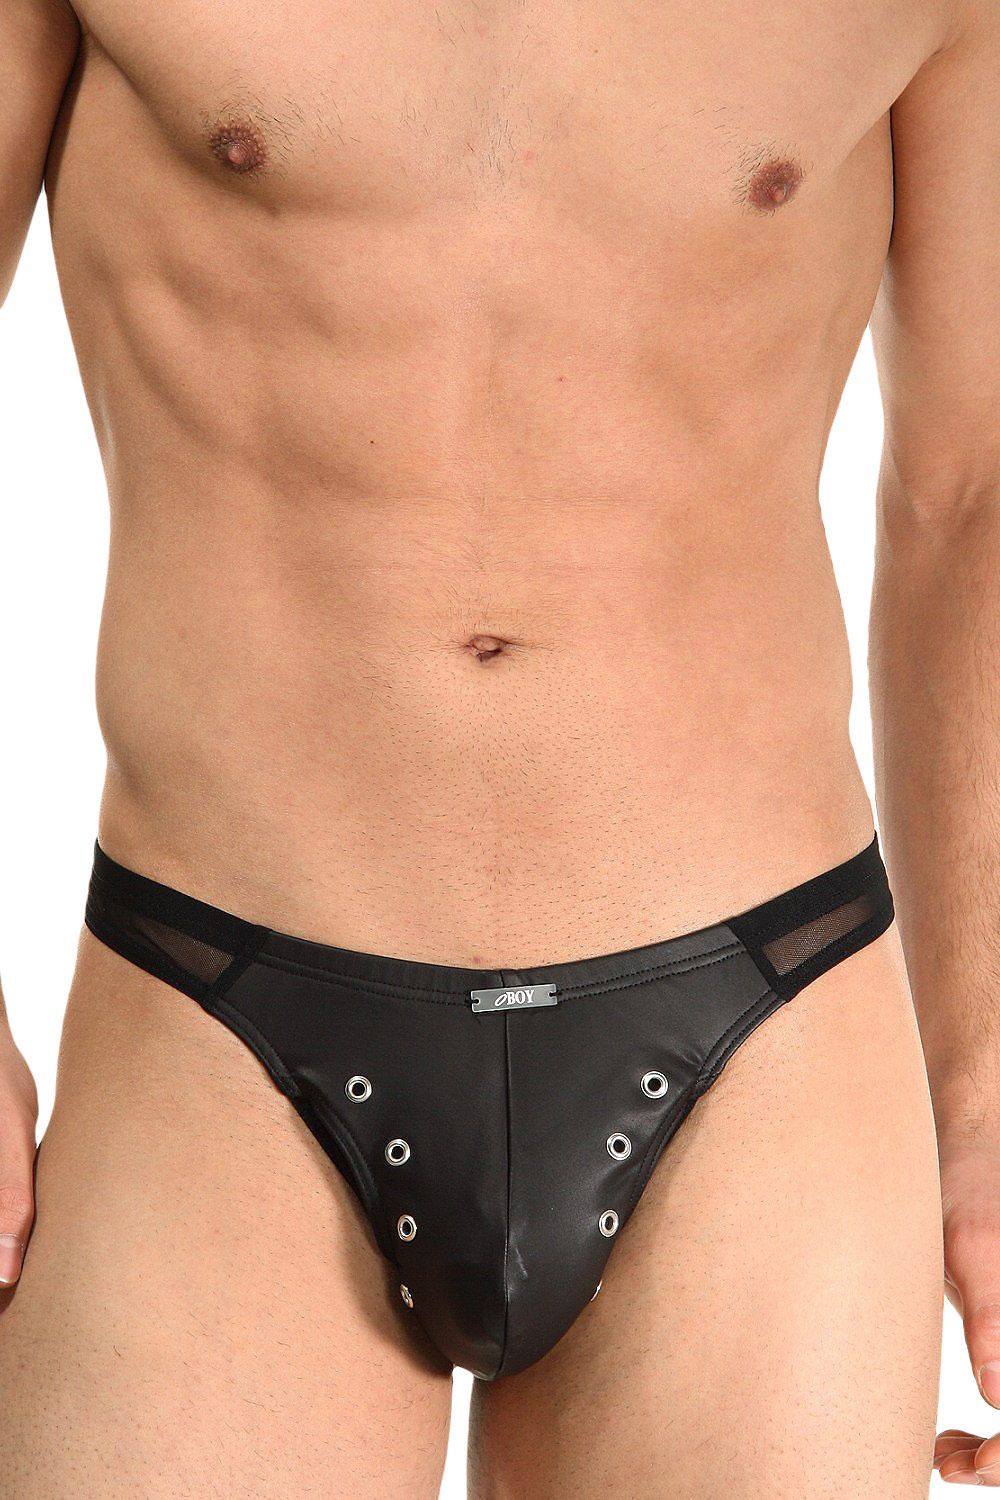 OBOY LIMITED EDITION thong at oboy.com